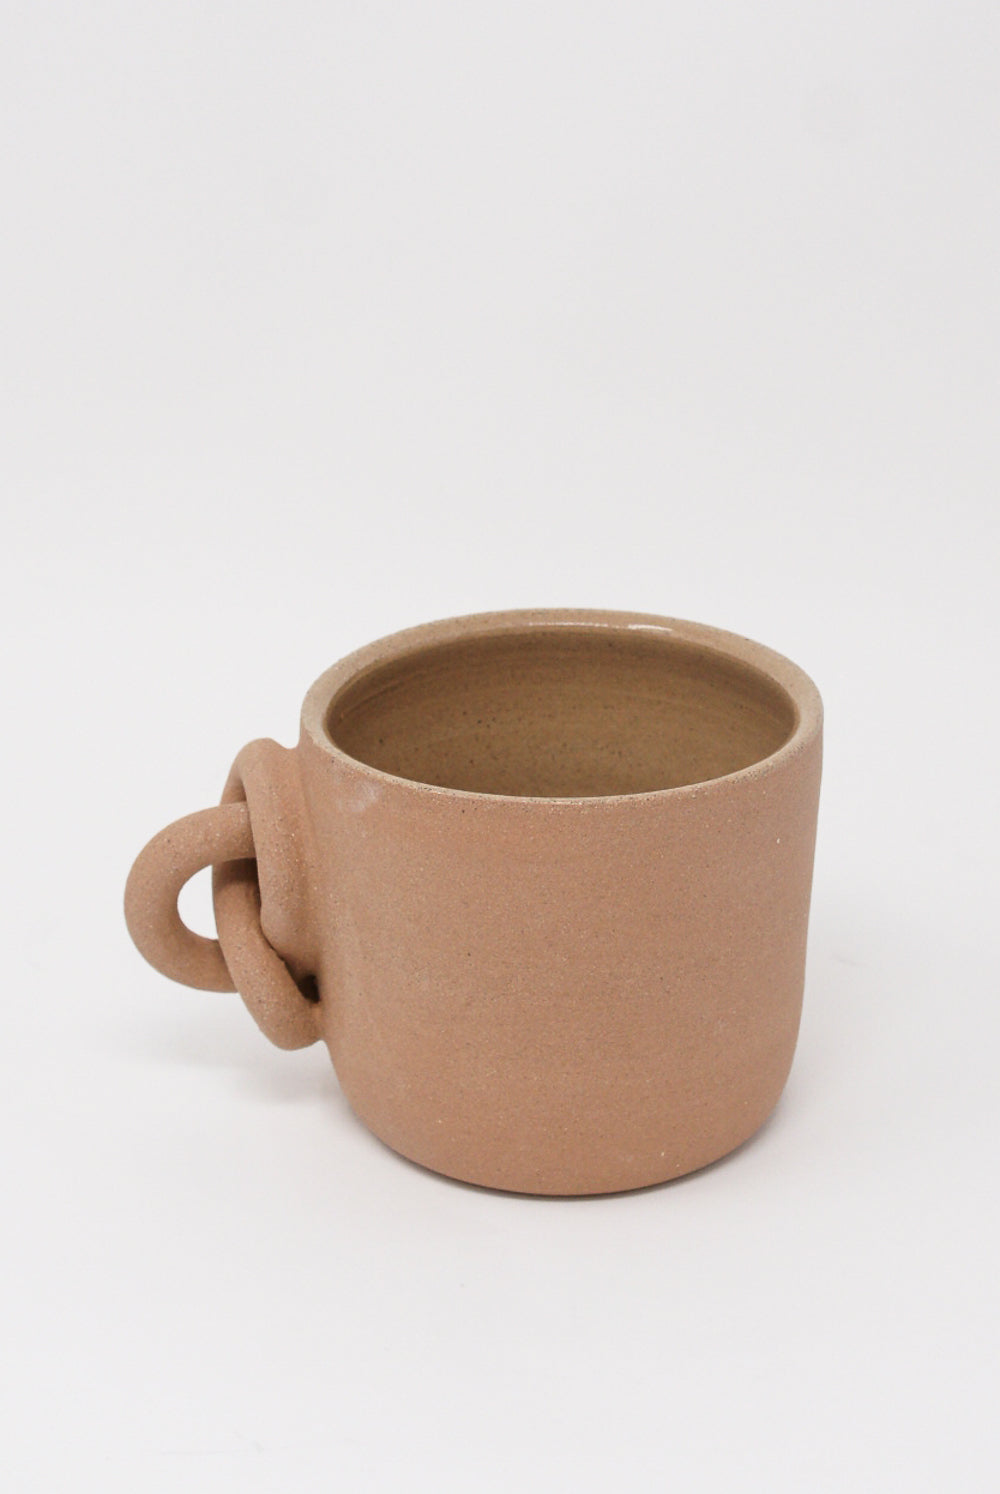 Lost Quarry - Single Knot Mug in Terracotta  side view